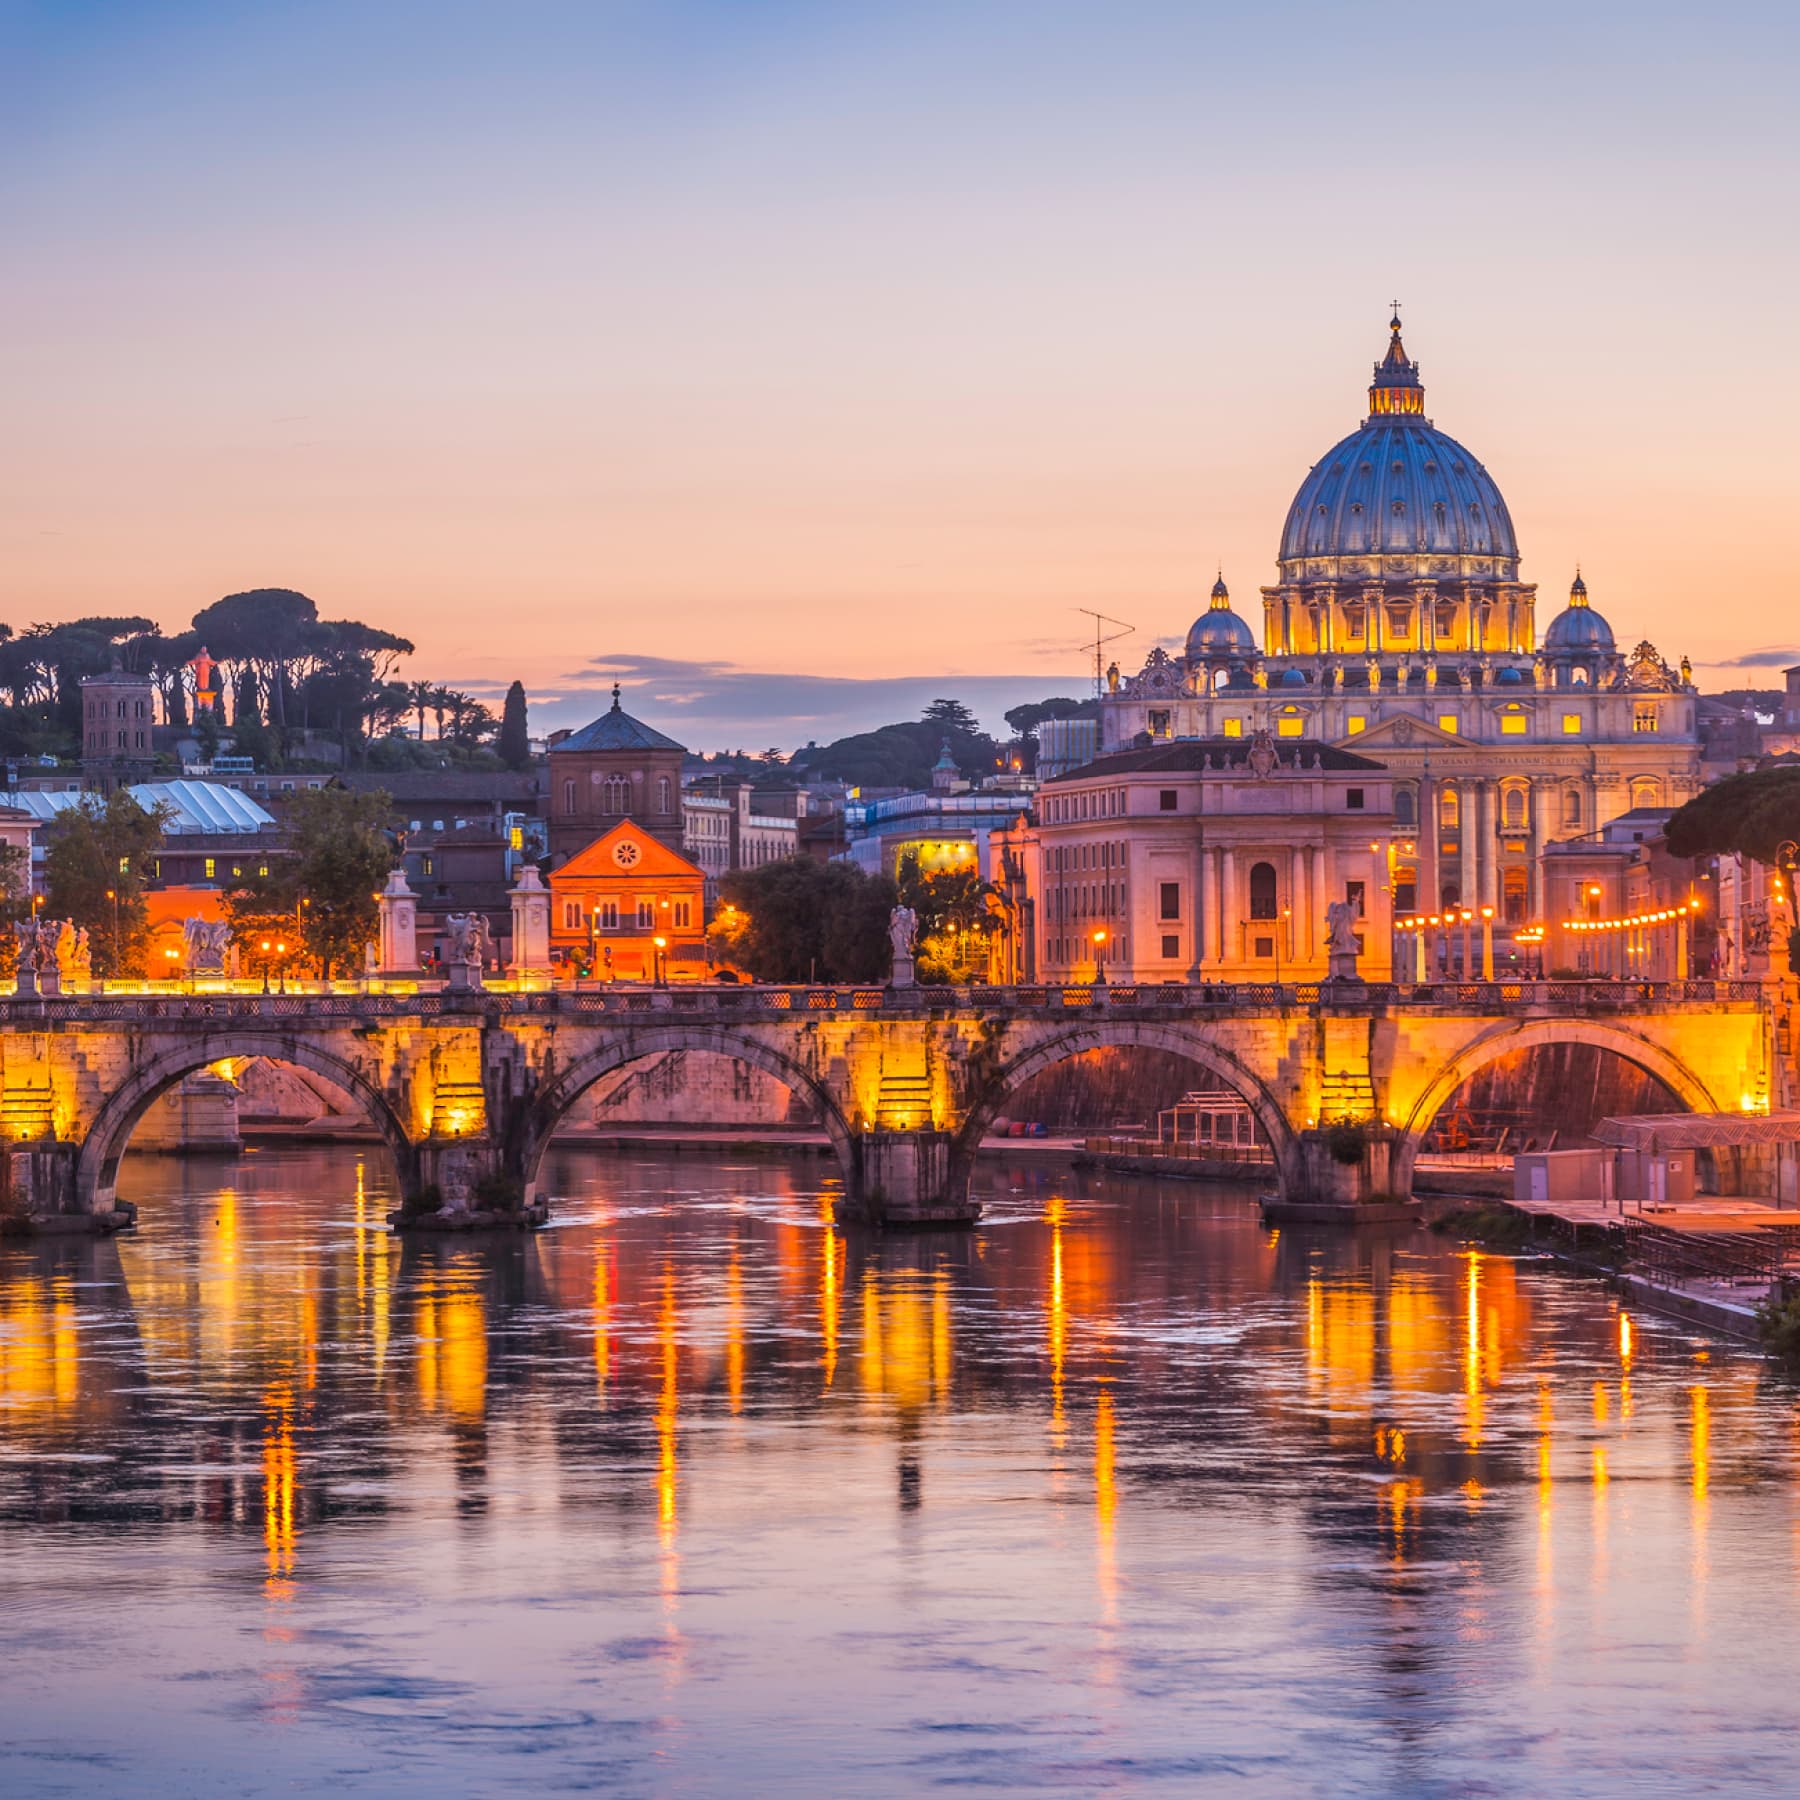 Rome is one of the best places to visit in 2023